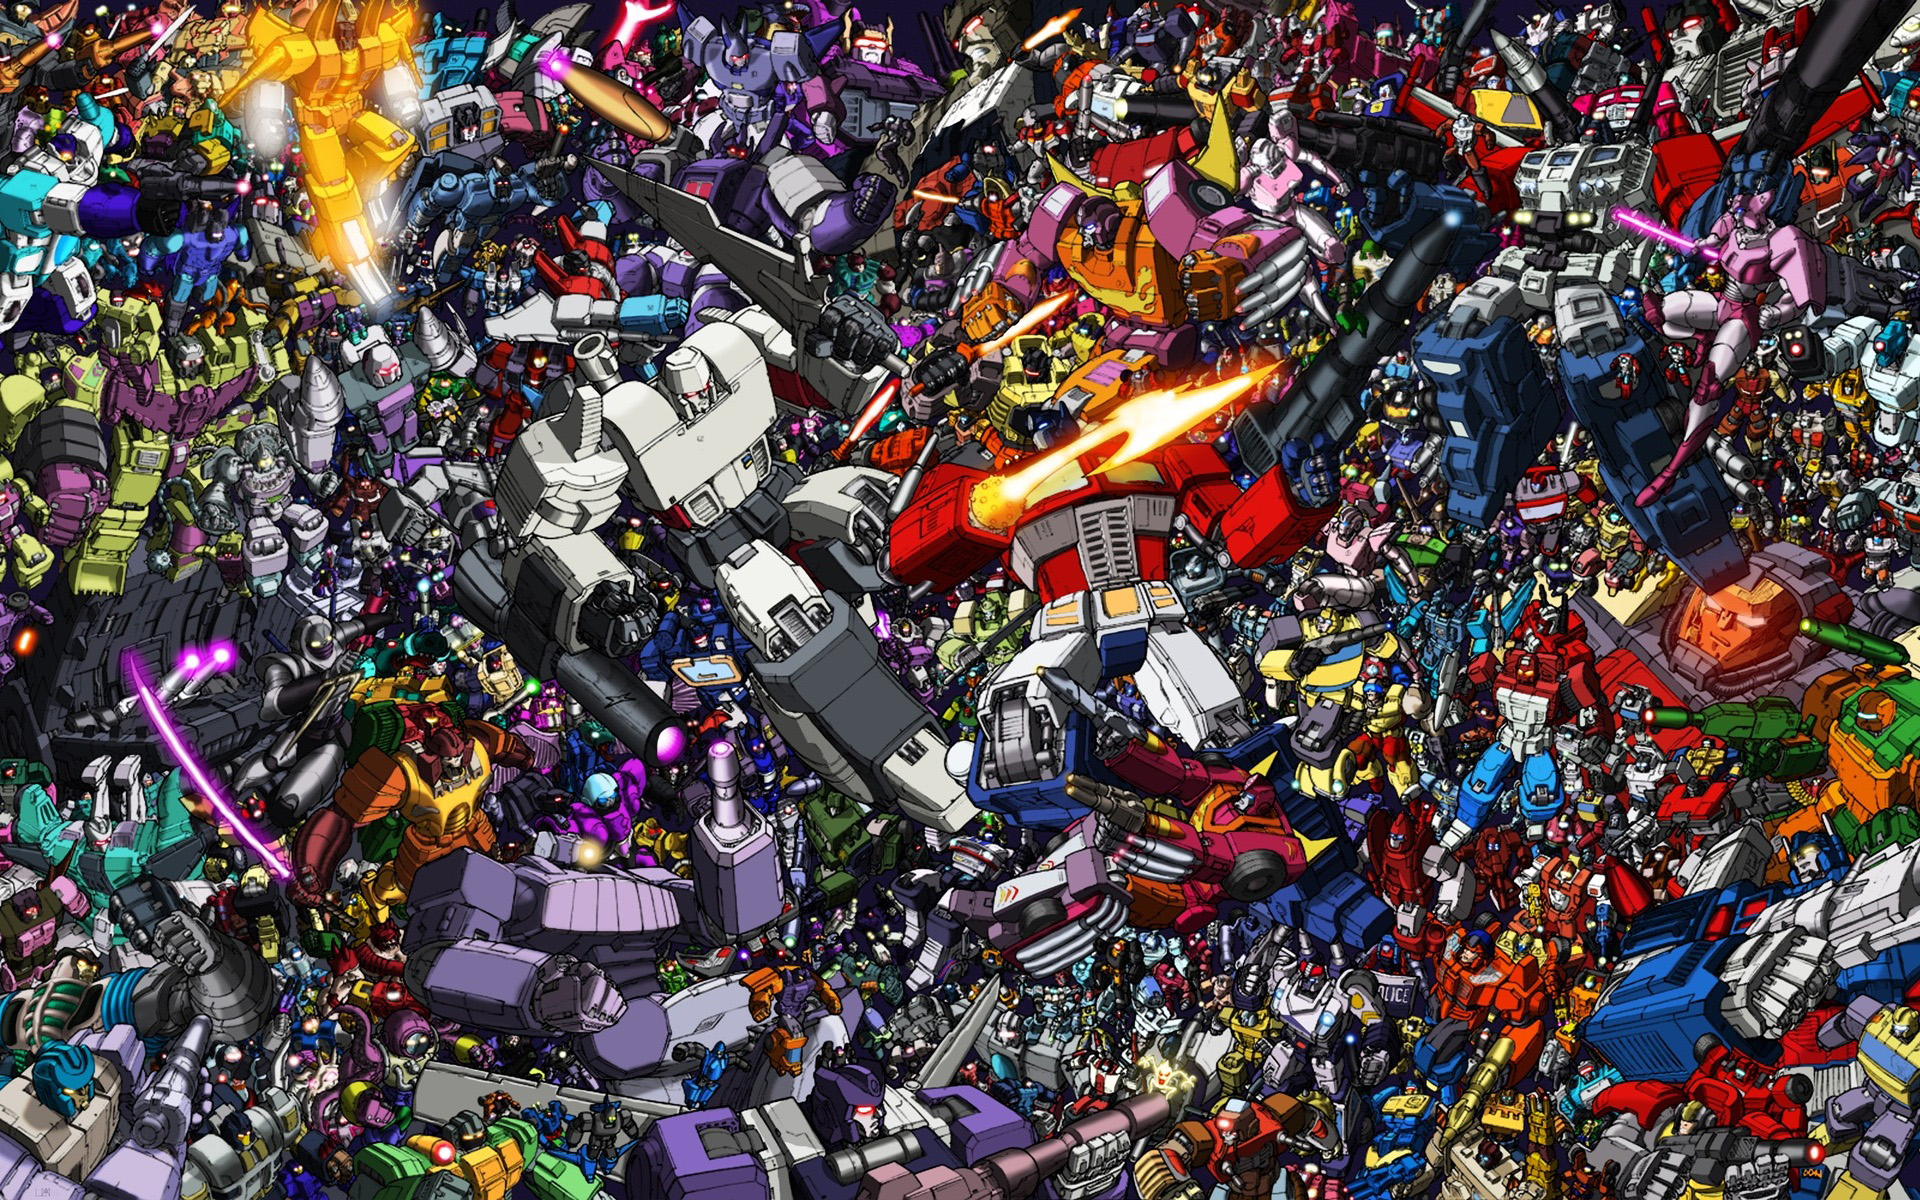 transformers desktop wallpaper,colorfulness,plastic,recycling,waste,fictional character